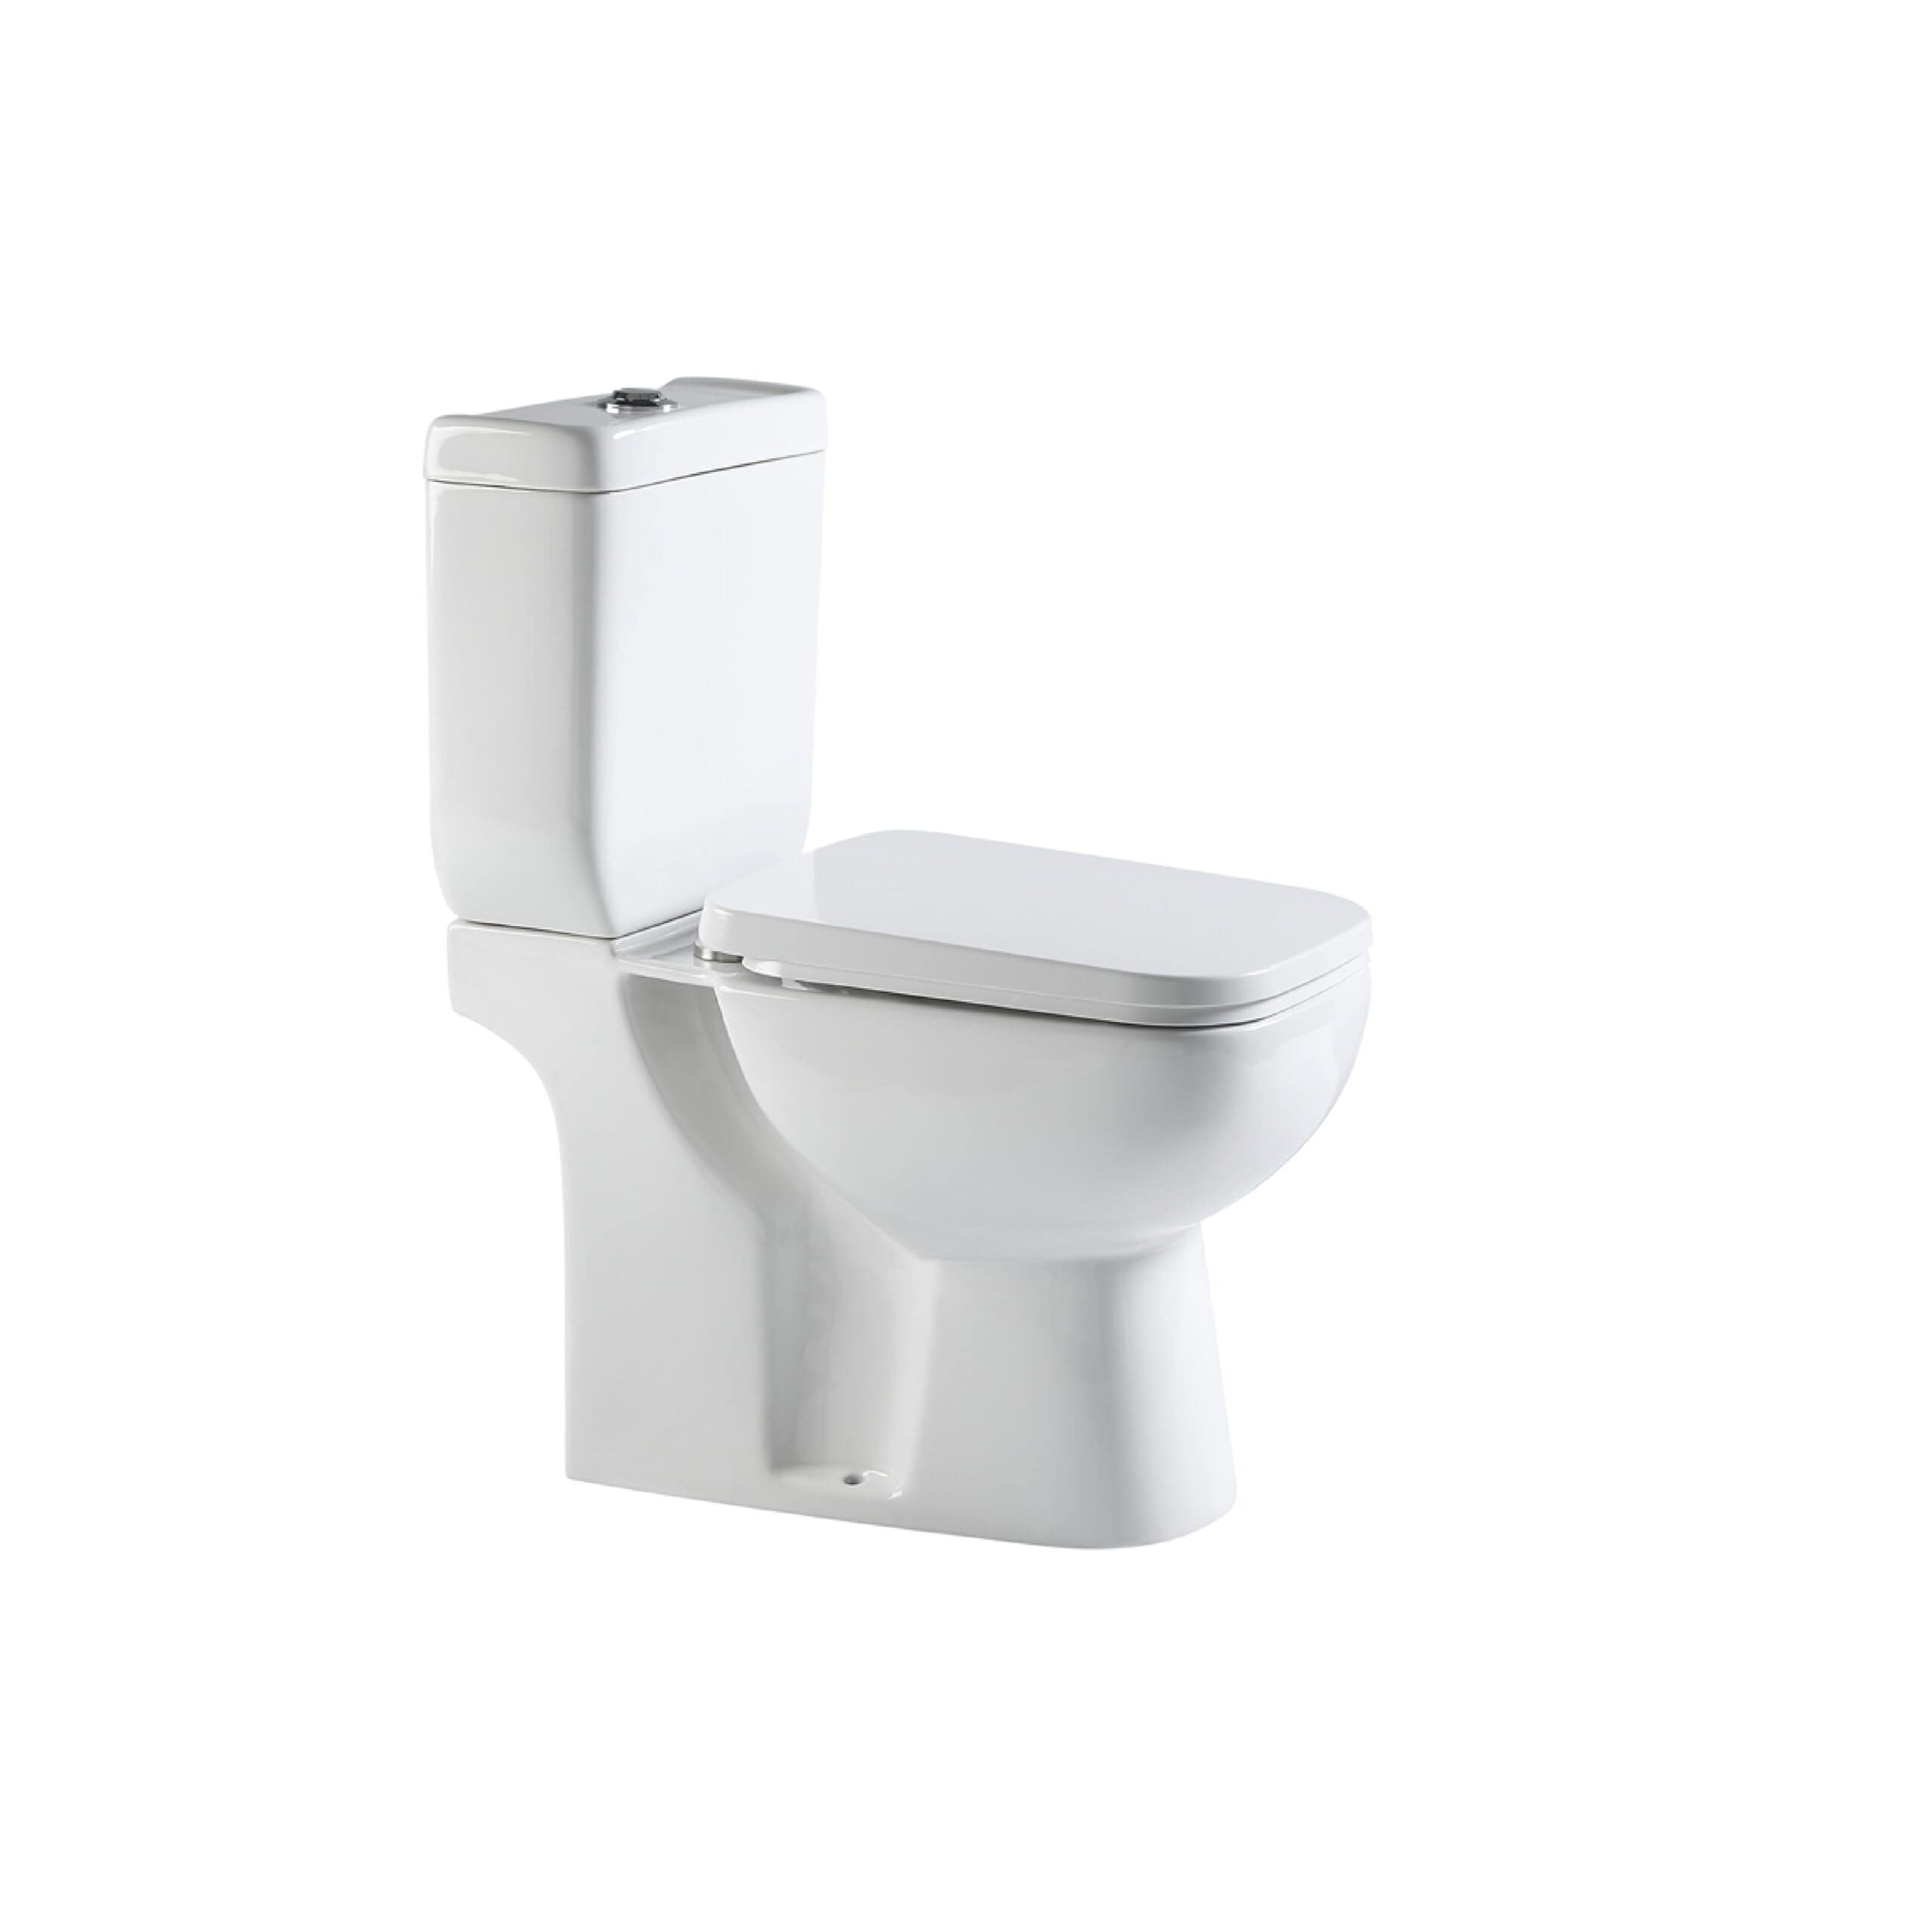 Two-piece P-trap Water Closet 650 x 380 x 810mm  - AP8855 | Supply Master | Accra, Ghana Toilet & Urinal Buy Tools hardware Building materials